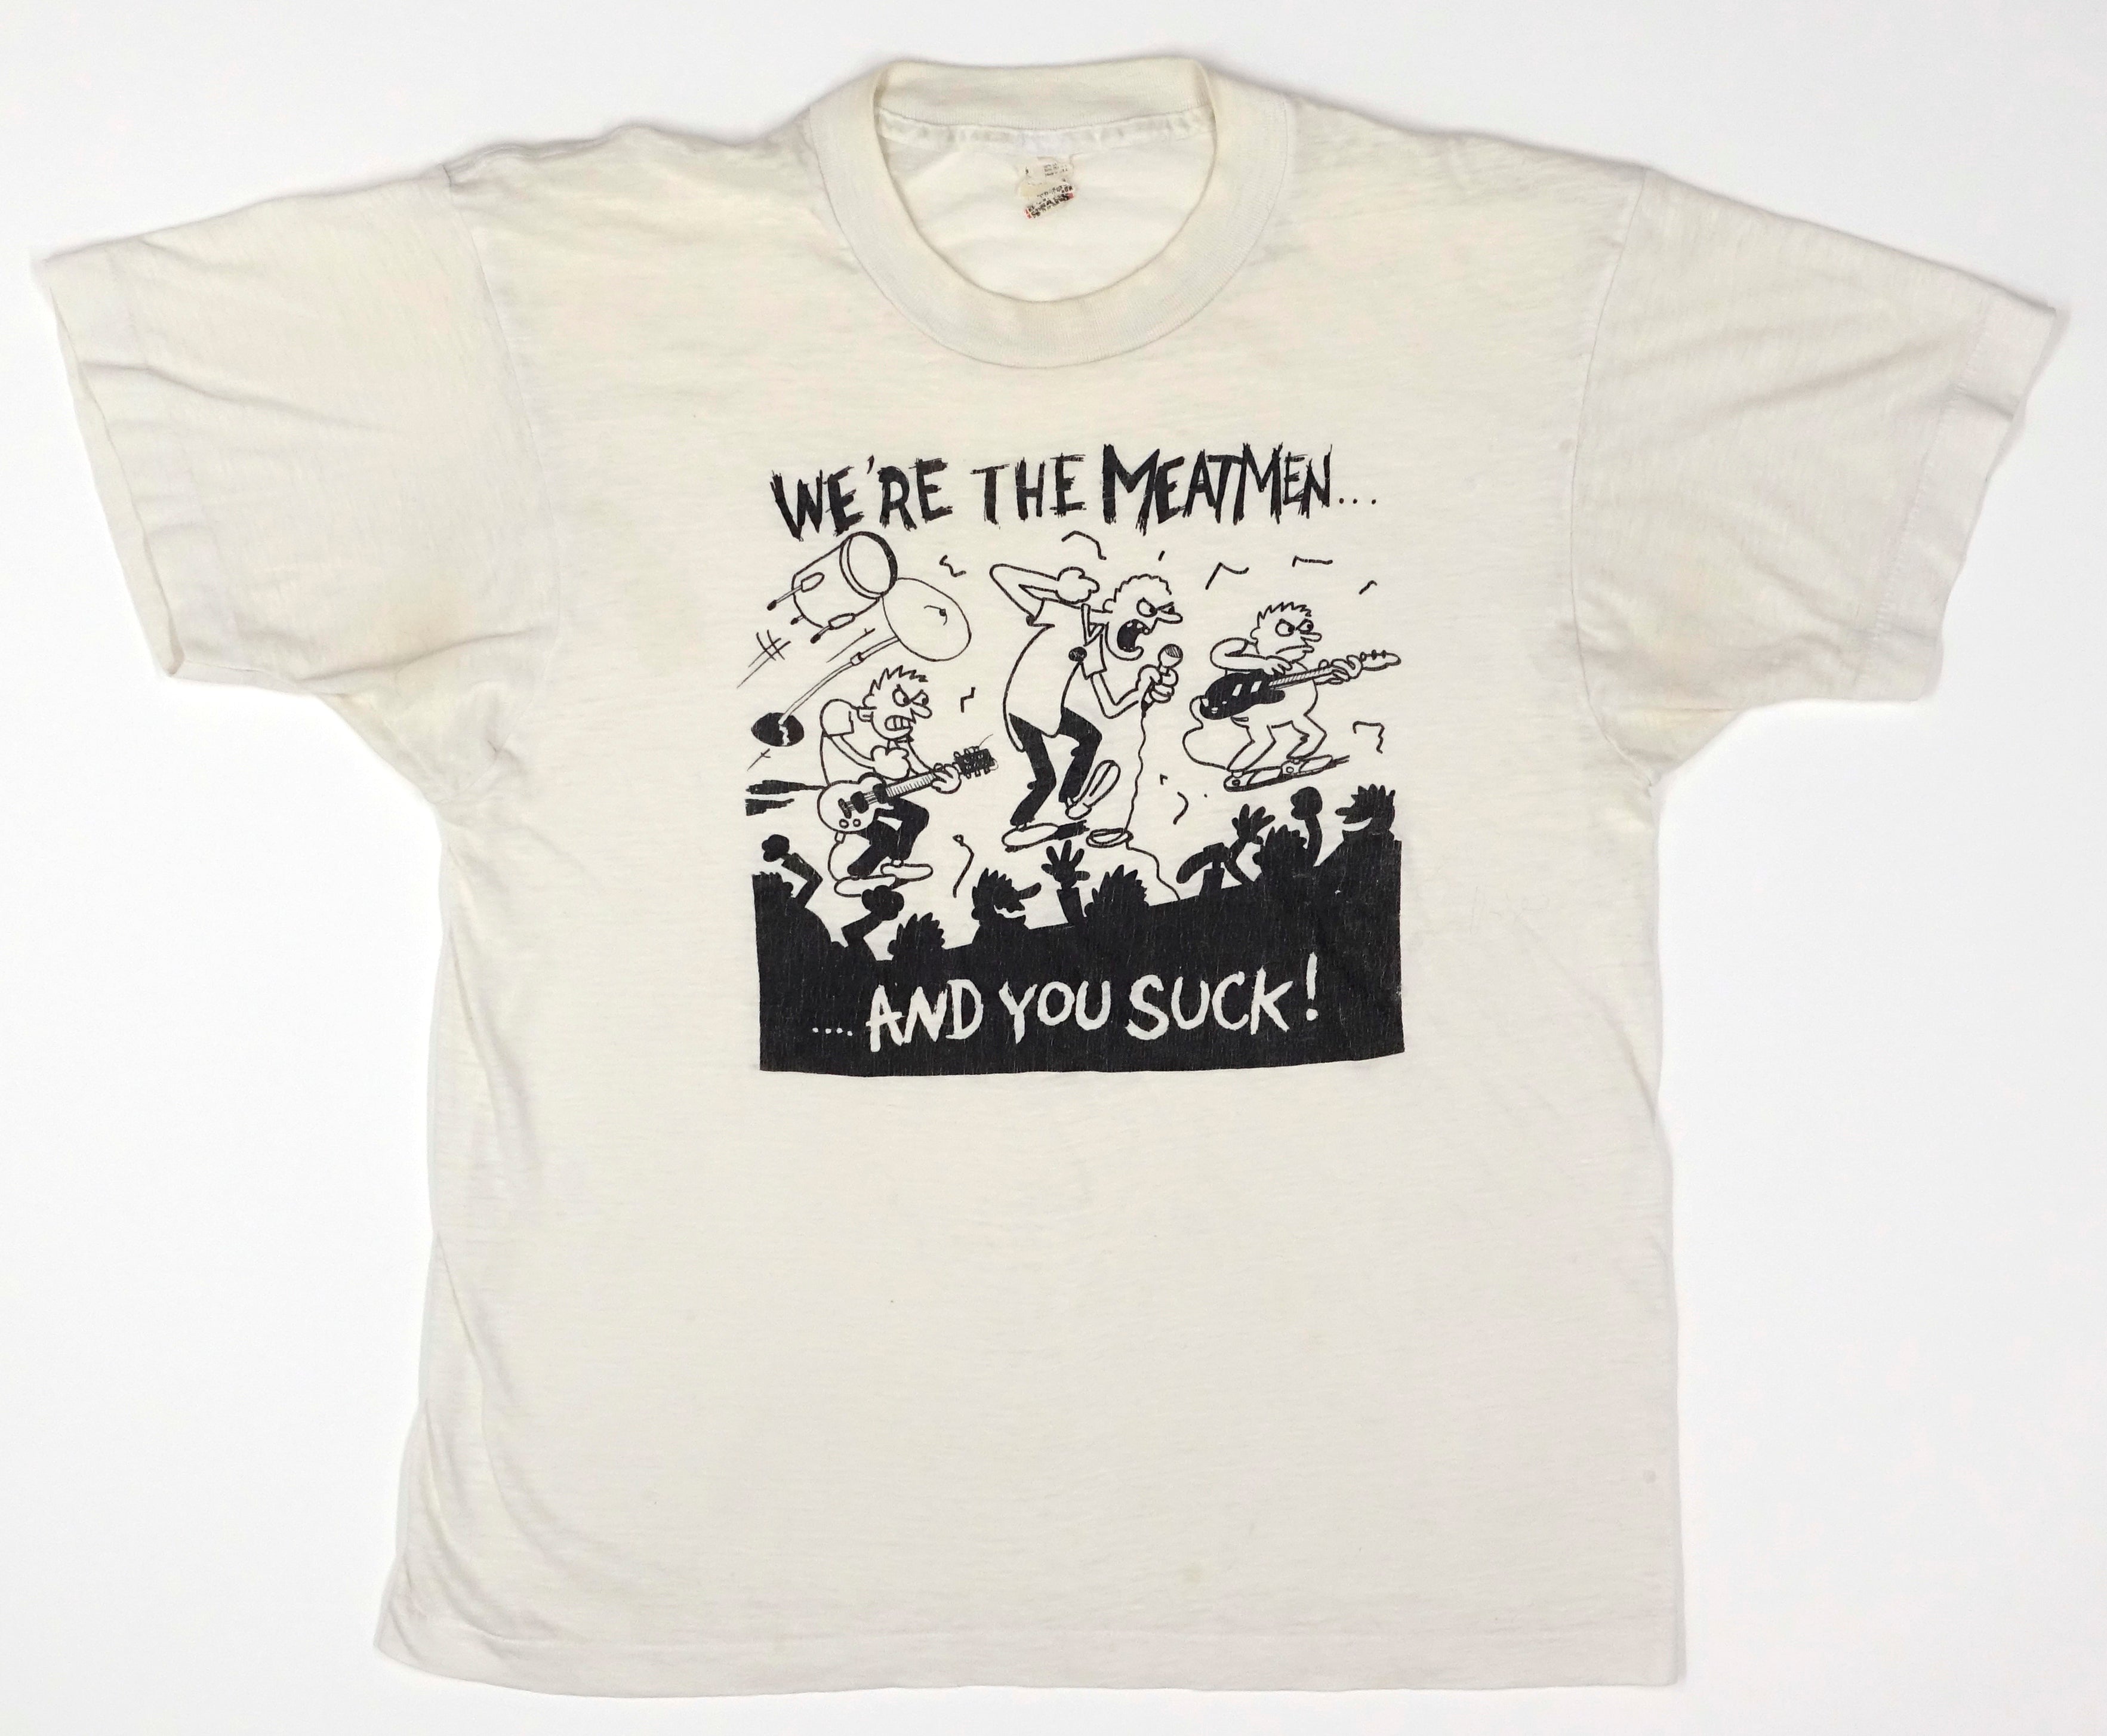 Meatmen - We're The Meatmen And You Suck 90's Tour Shirt Size Large